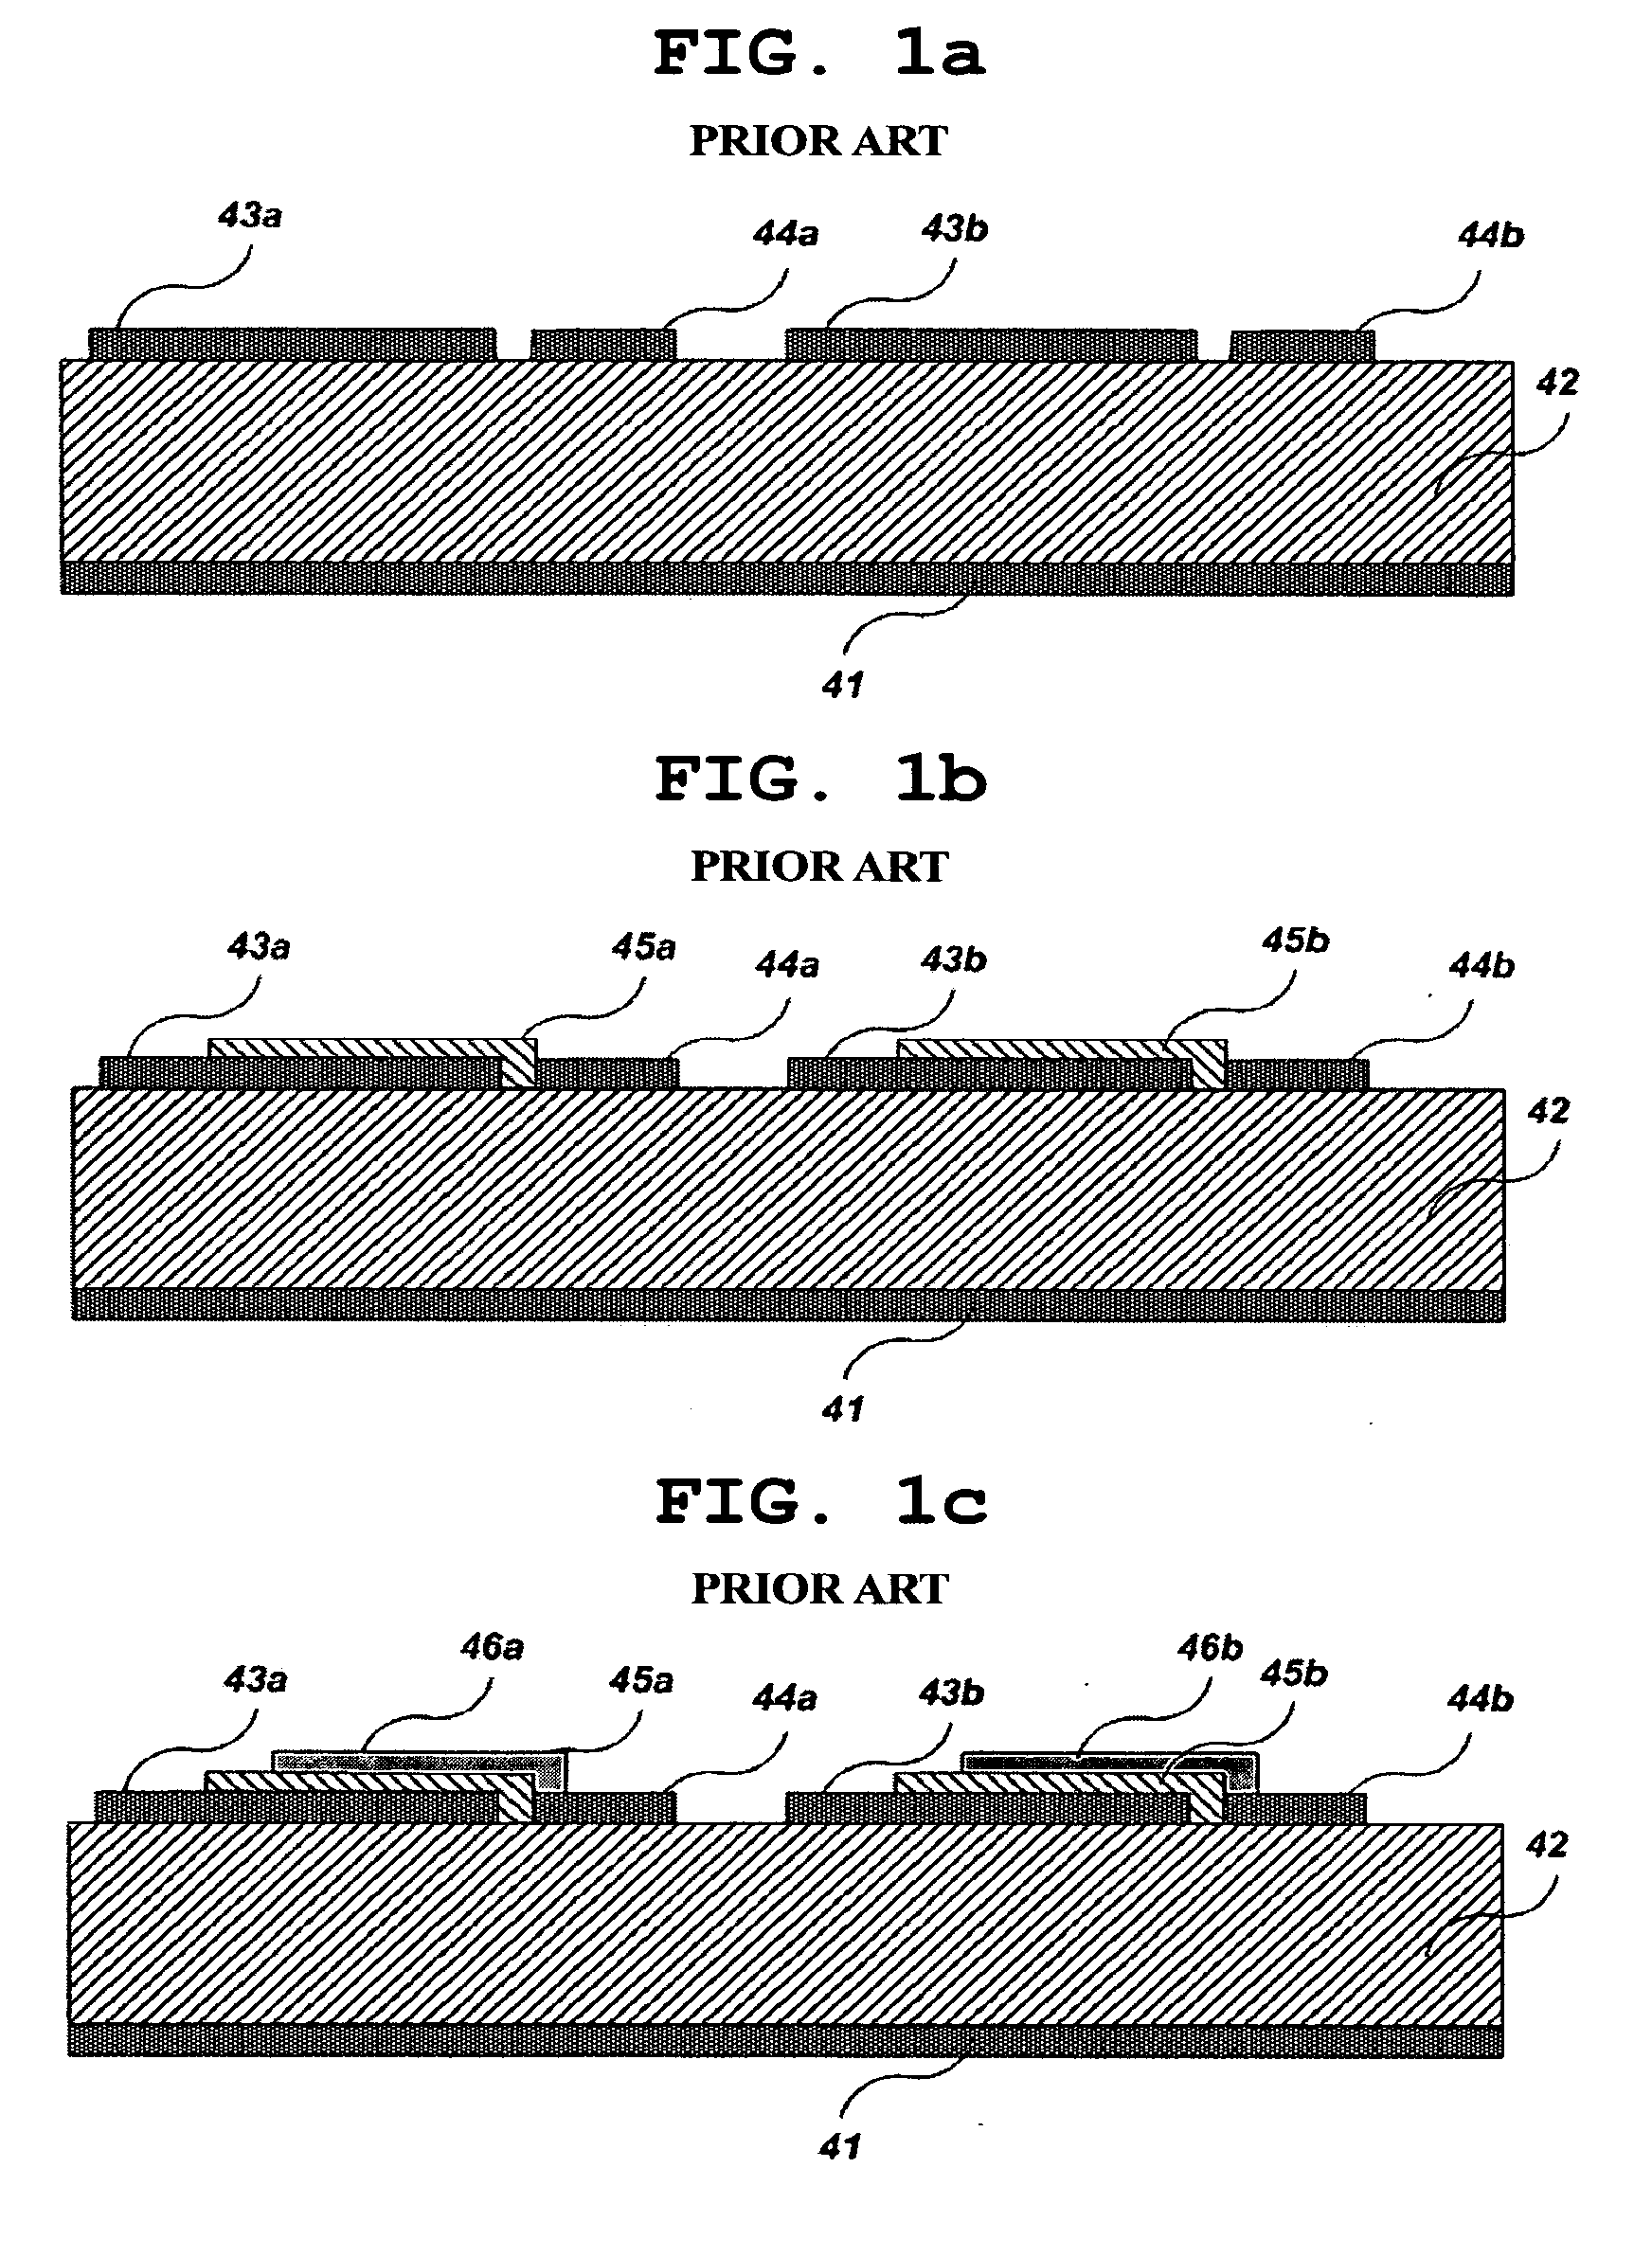 Printed circuit board including embedded capacitor having high dielectric constant and method of fabricating same